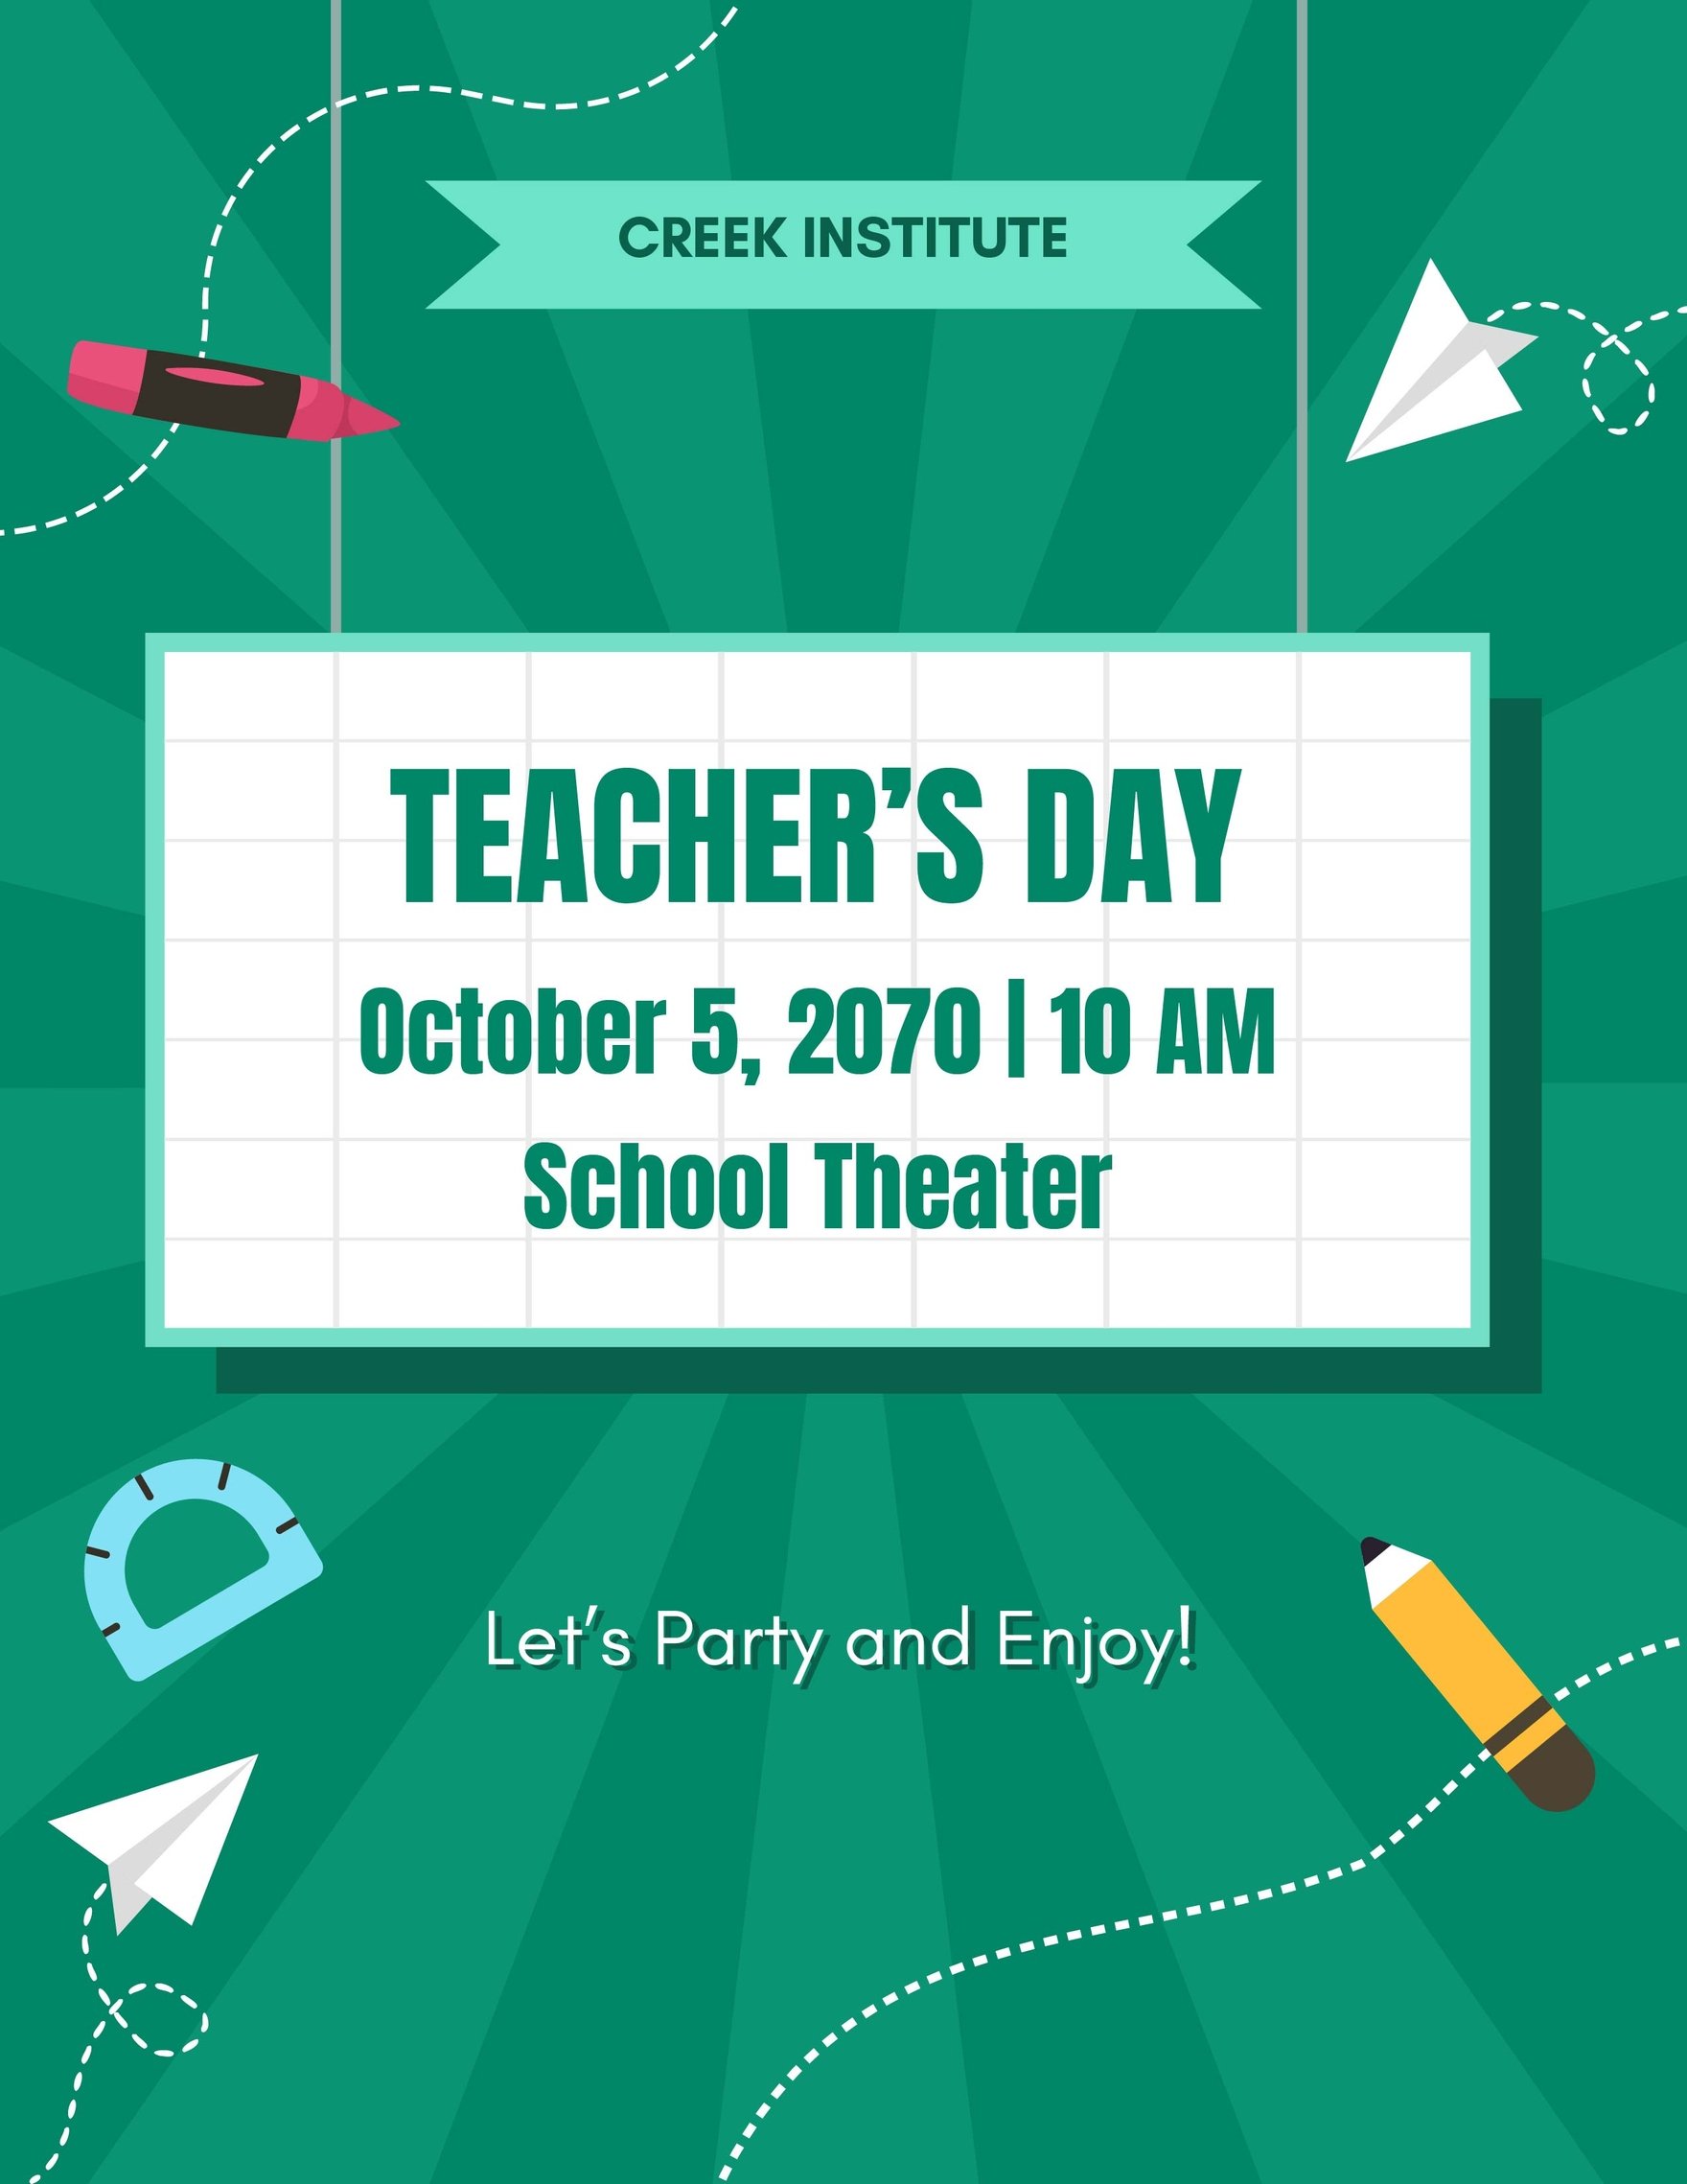 Free Teacher's Day Flyer Template in Word, Google Docs, Illustrator, PSD, Apple Pages, Publisher